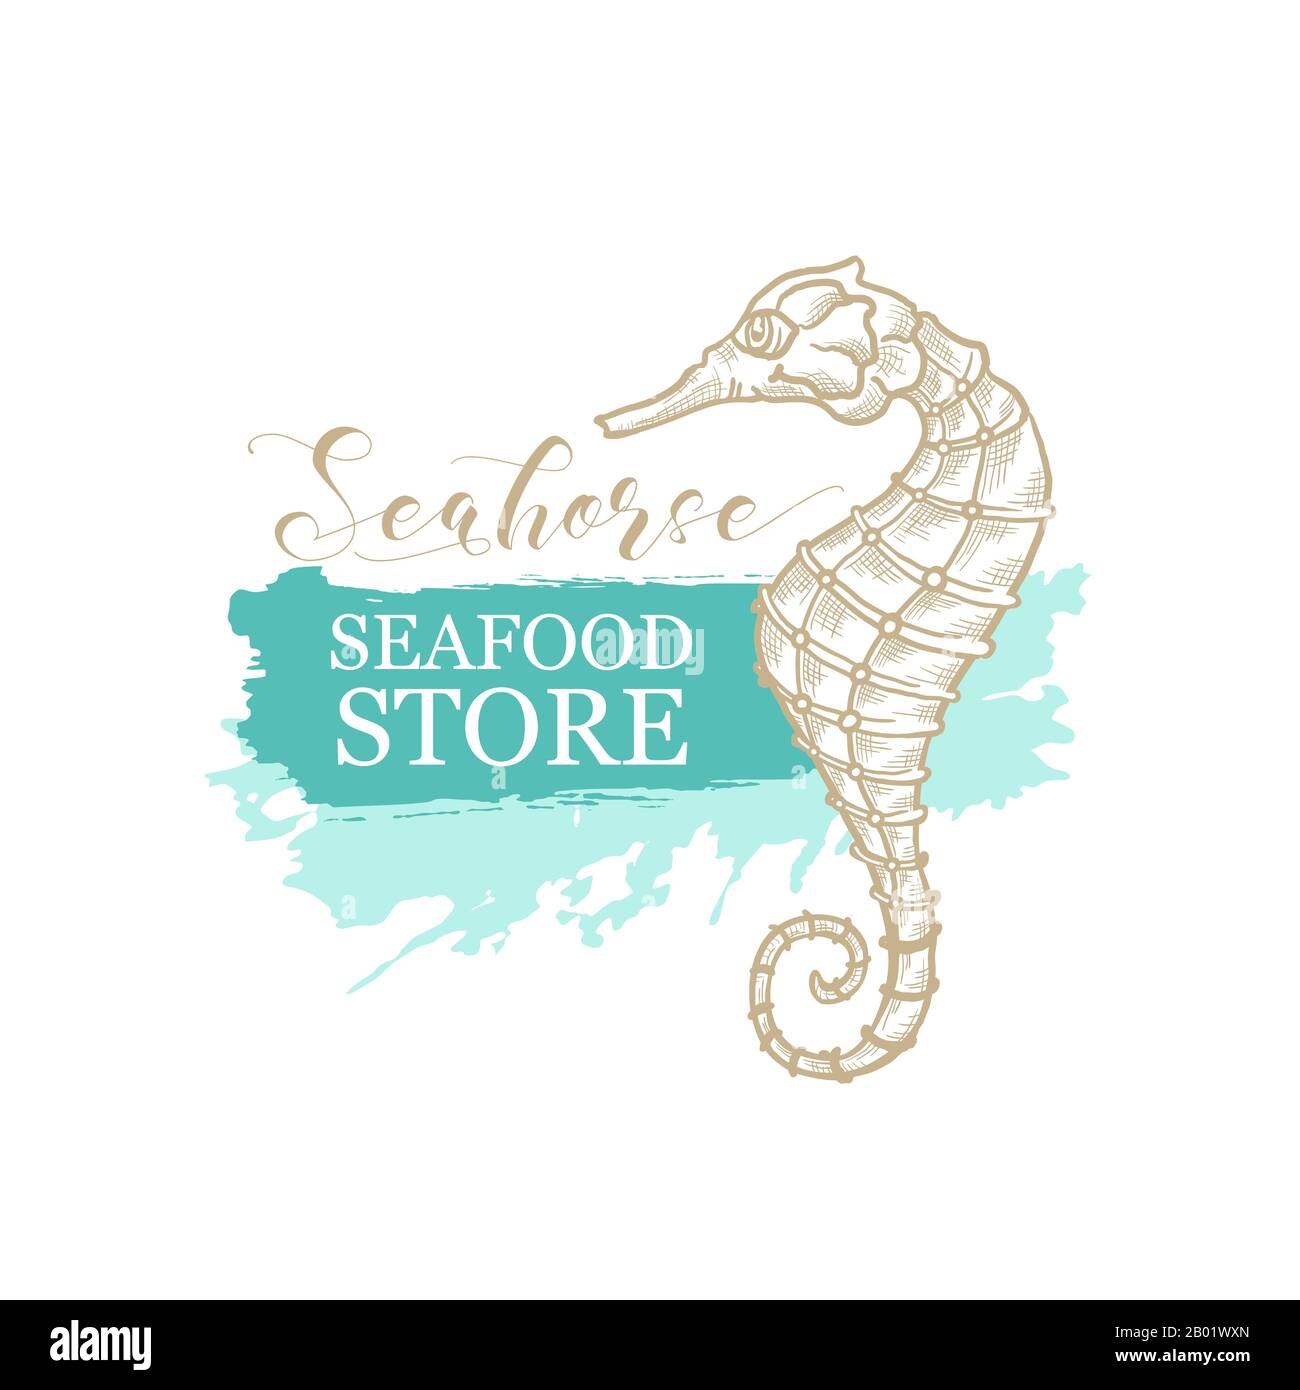 Seahorse vector thin line art design for seafood store and fish market logo. Seahorse in golden pencil hatching, calligraphy and sketch texture on marine green or turquoise paint stroke background Stock Vector